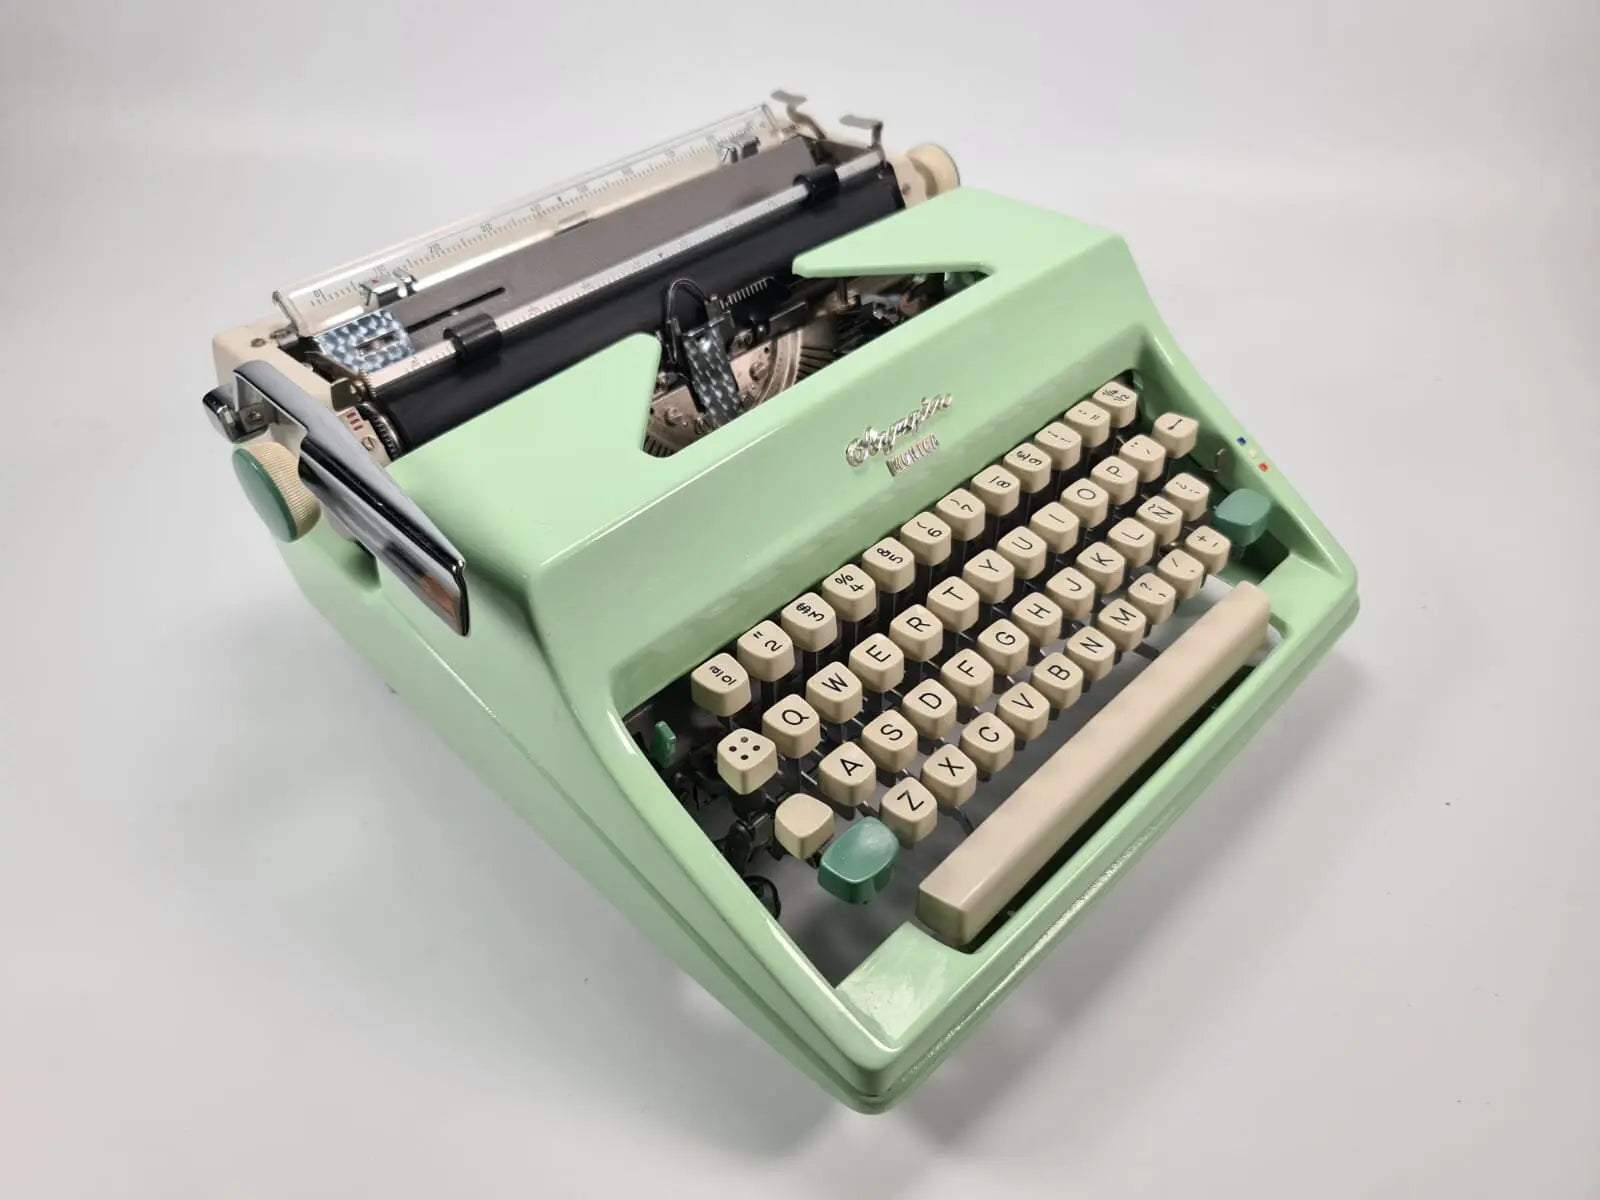 Limited Edition Olympia SM8 Mint Green Typewriter, Vintage, Mint Condition, Manual Portable, Professionally Serviced by Typewriter.Company - ElGranero Typewriter.Company